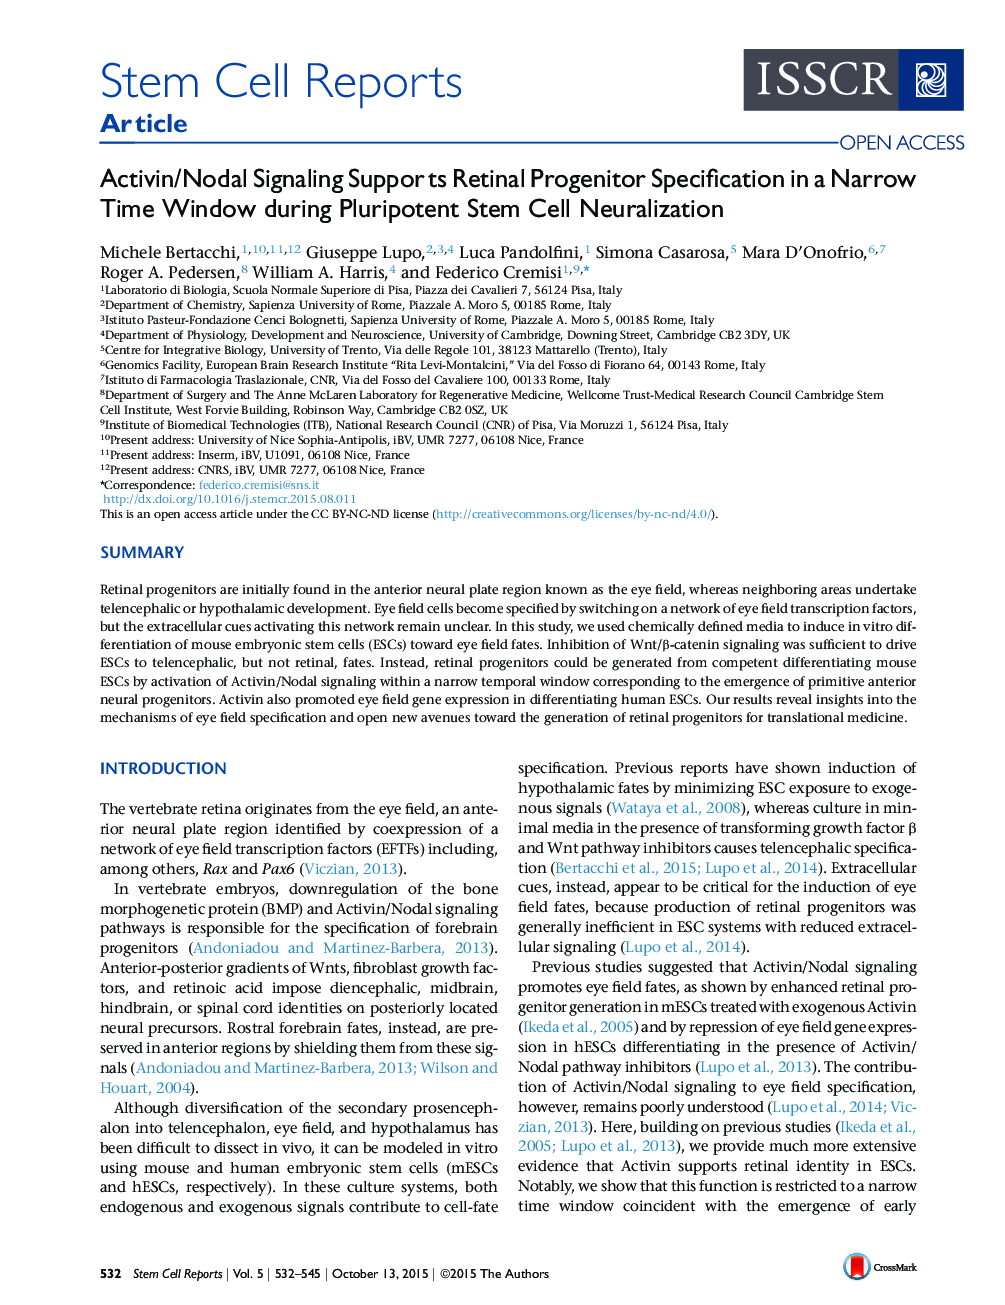 Activin/Nodal Signaling Supports Retinal Progenitor Specification in a Narrow Time Window during Pluripotent Stem Cell Neuralization 